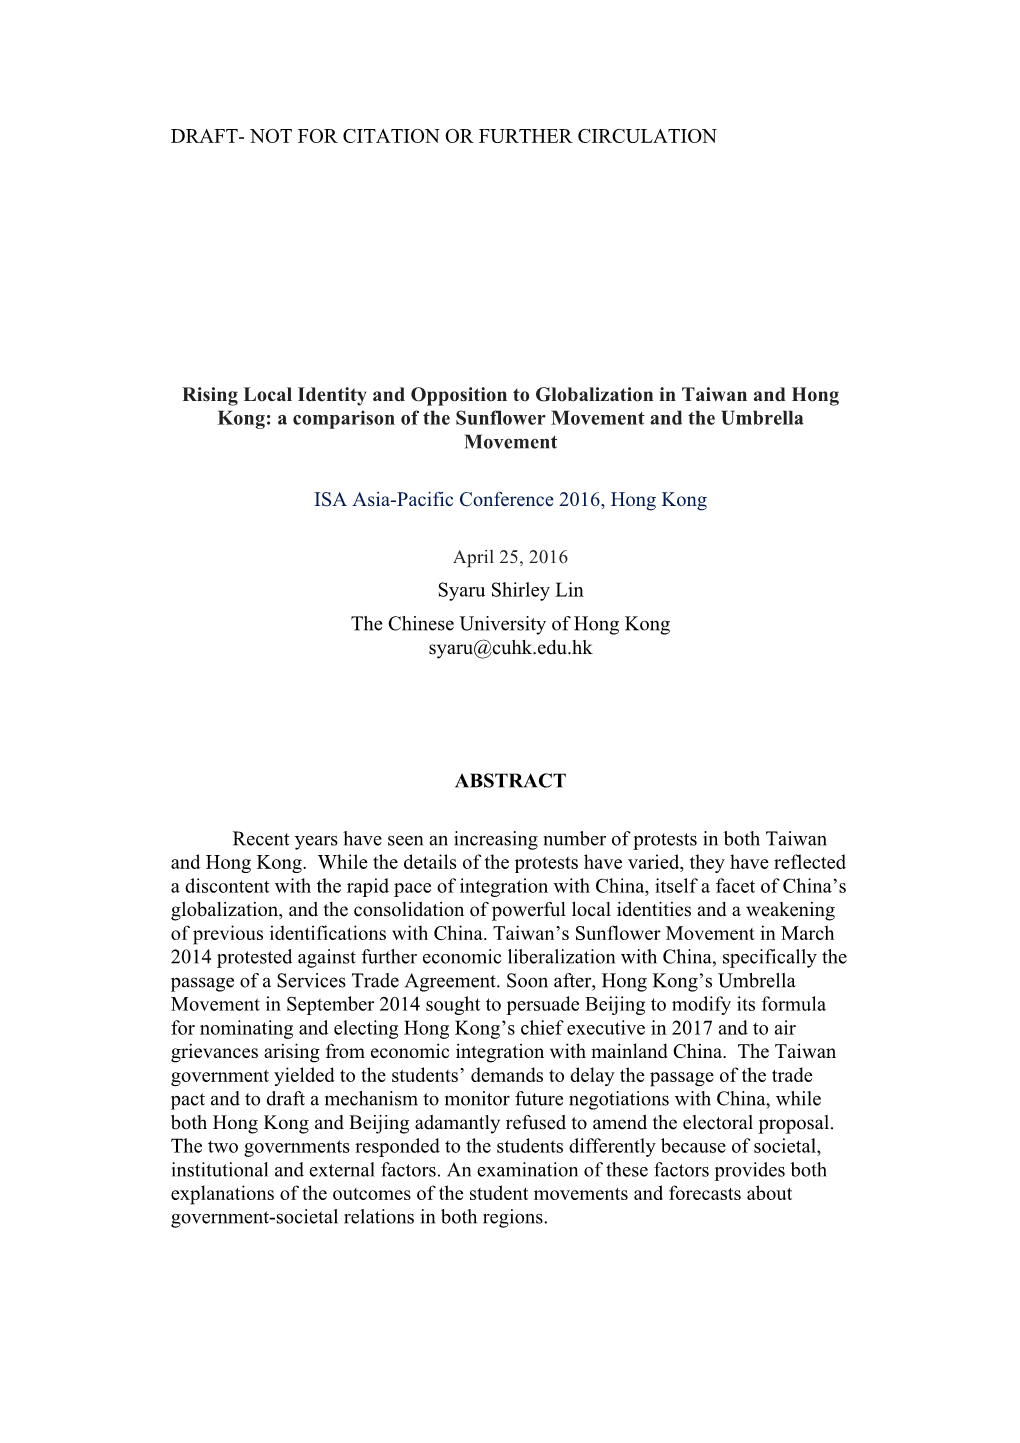 DRAFT- NOT for CITATION OR FURTHER CIRCULATION Rising Local Identity and Opposition to Globalization in Taiwan and Hong Kong: A